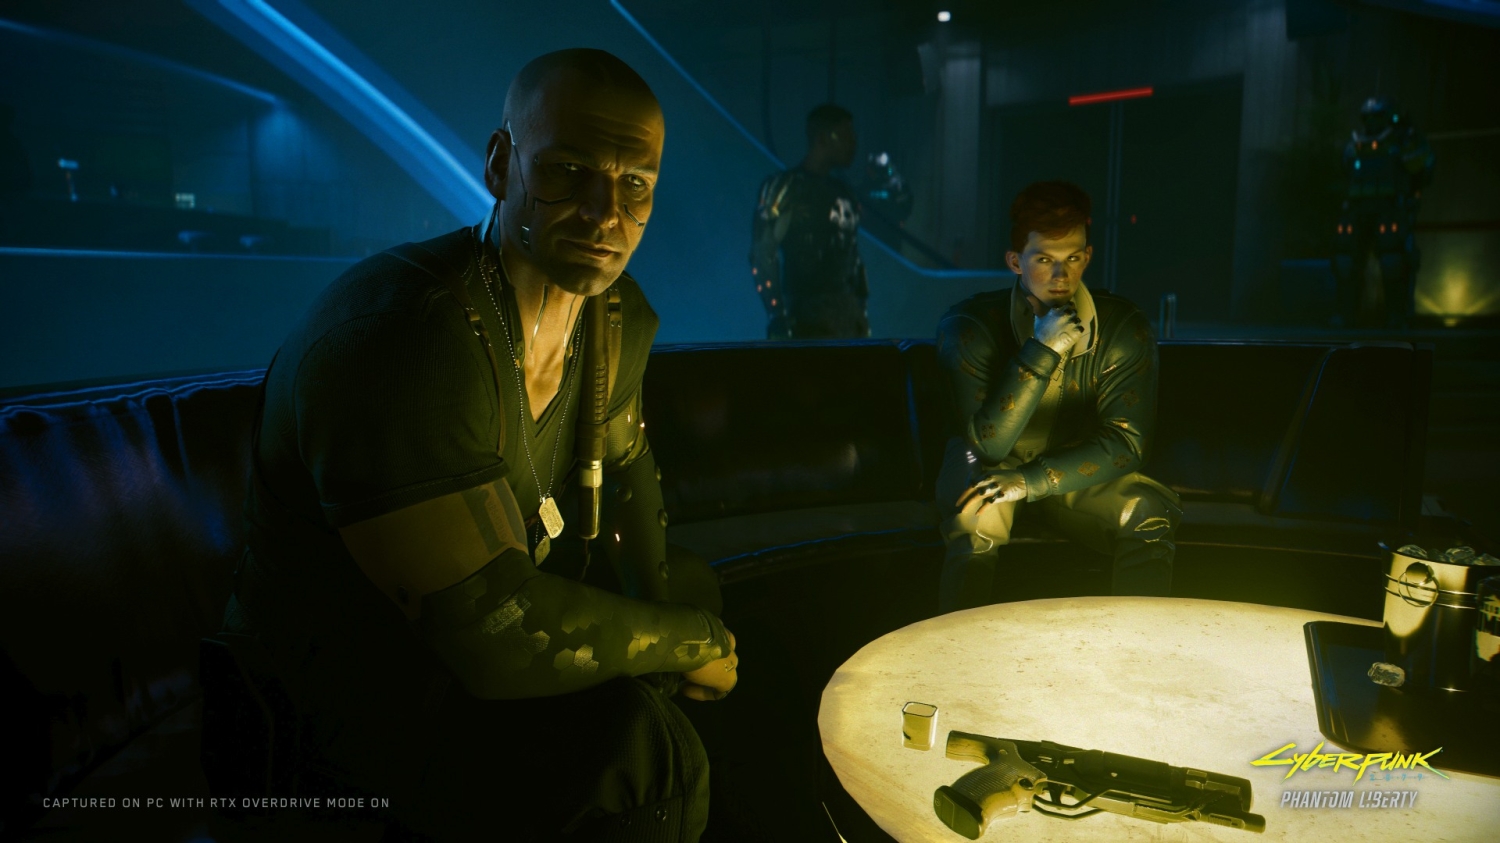 Cyberpunk 2077's Ray Tracing: Overdrive Mode has arrived in Night City with  full ray tracing & NVIDIA DLSS 3. And#Palit is Giving Away…